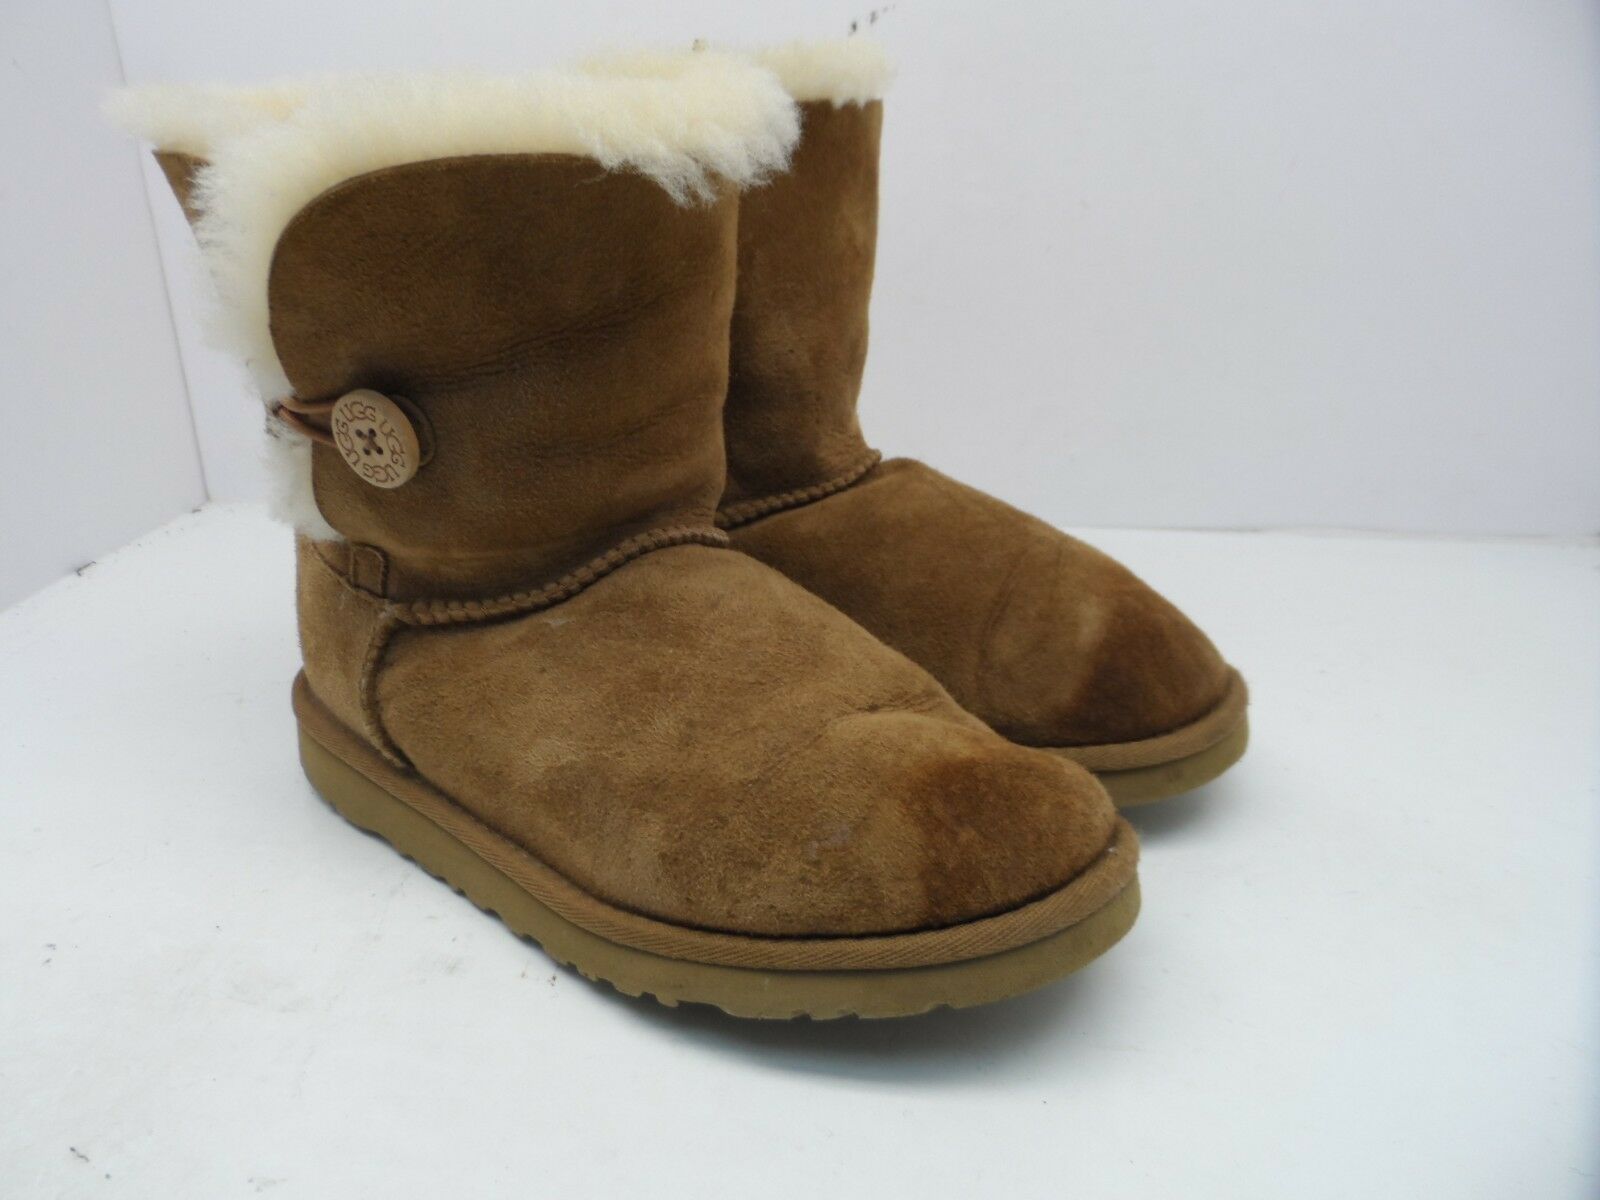 Primary image for Ugg Australia Girl's 5991 Bailey Button Boots Chestnut Size 4M